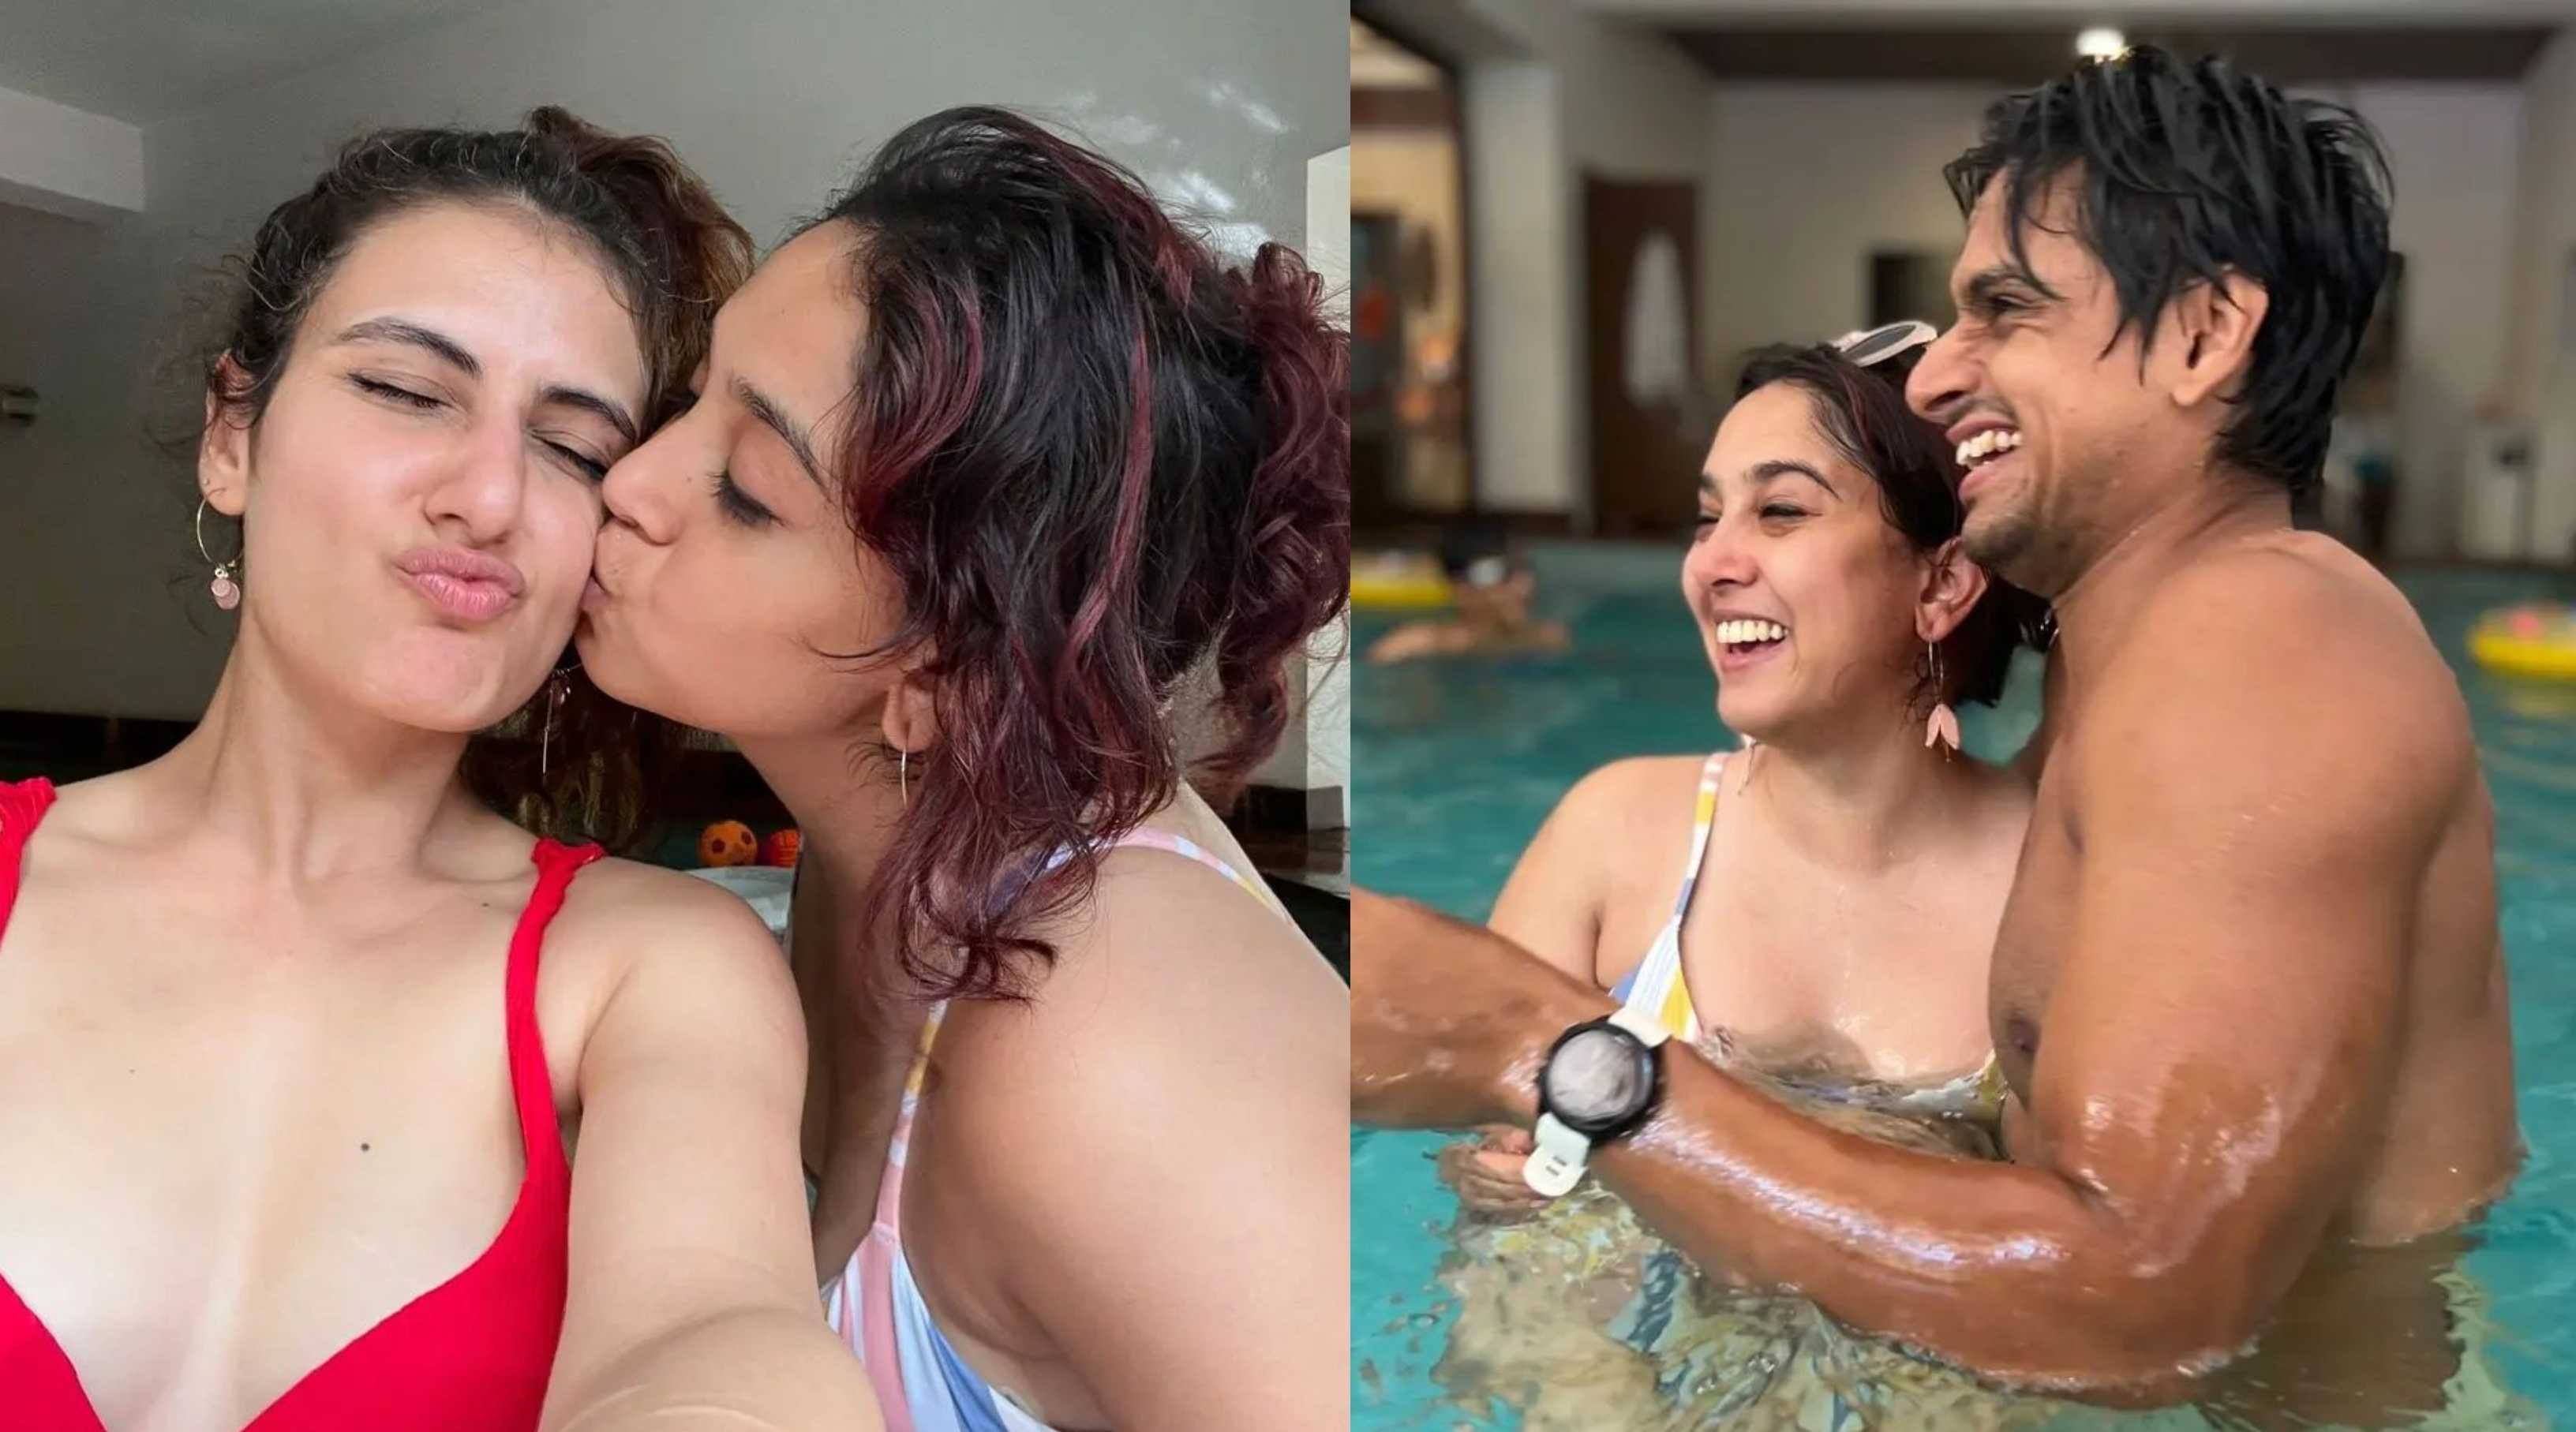 Aamir Khan’s daughter Ira Khan shares more pictures from her pool party; leaves a witty message for trolls in the caption